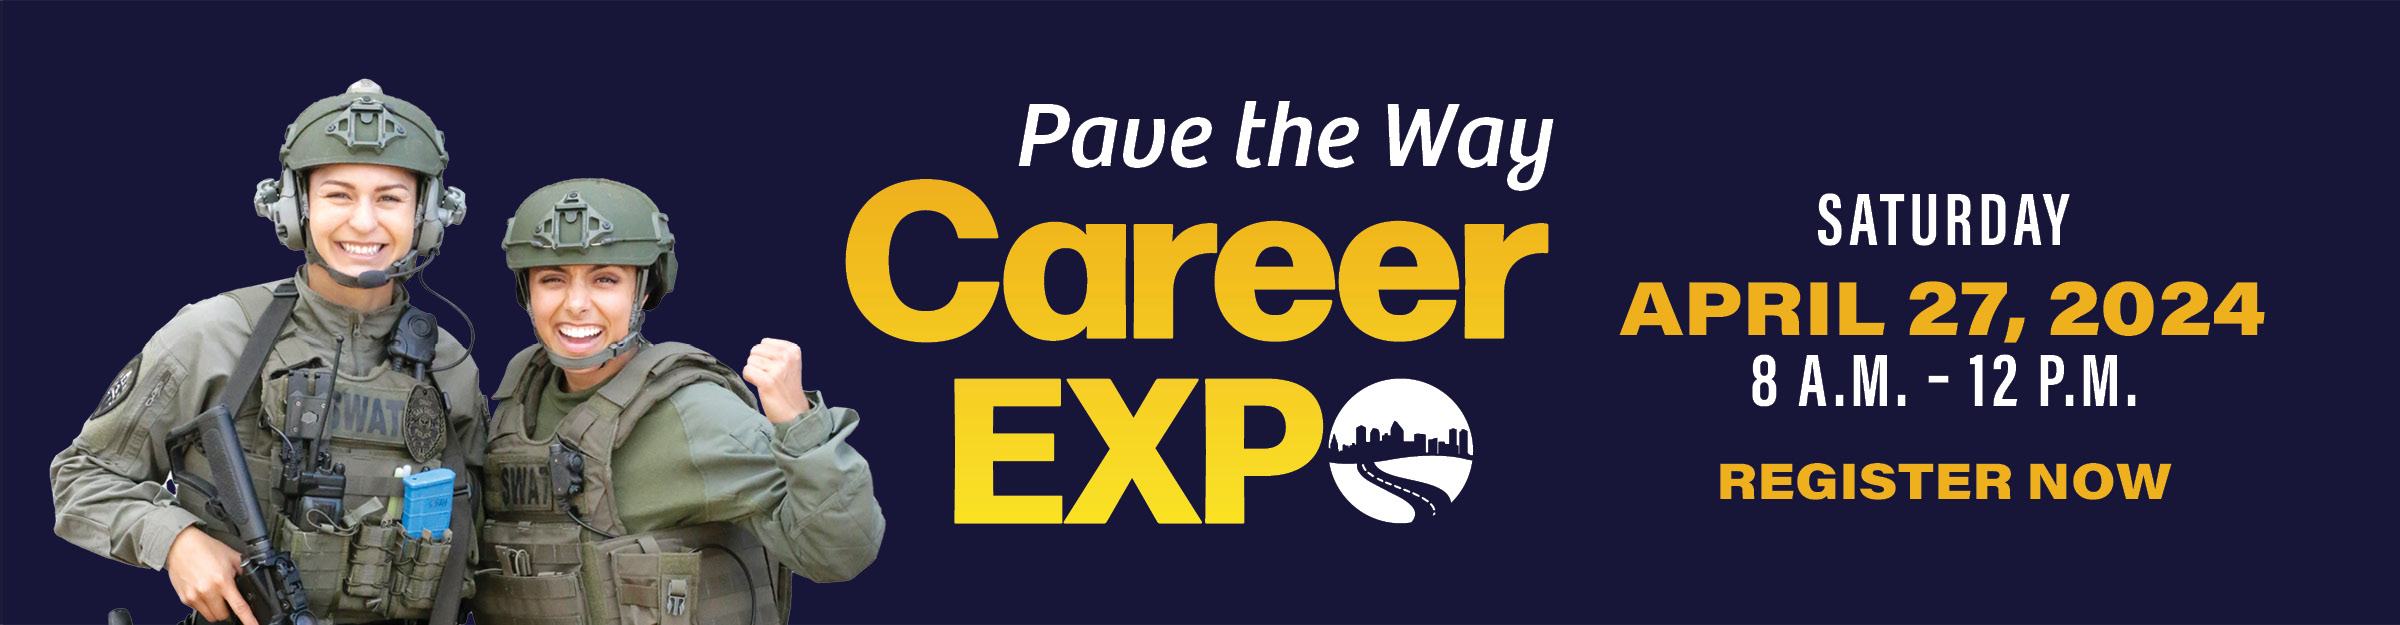 Pave the Way Career Exppo 2024